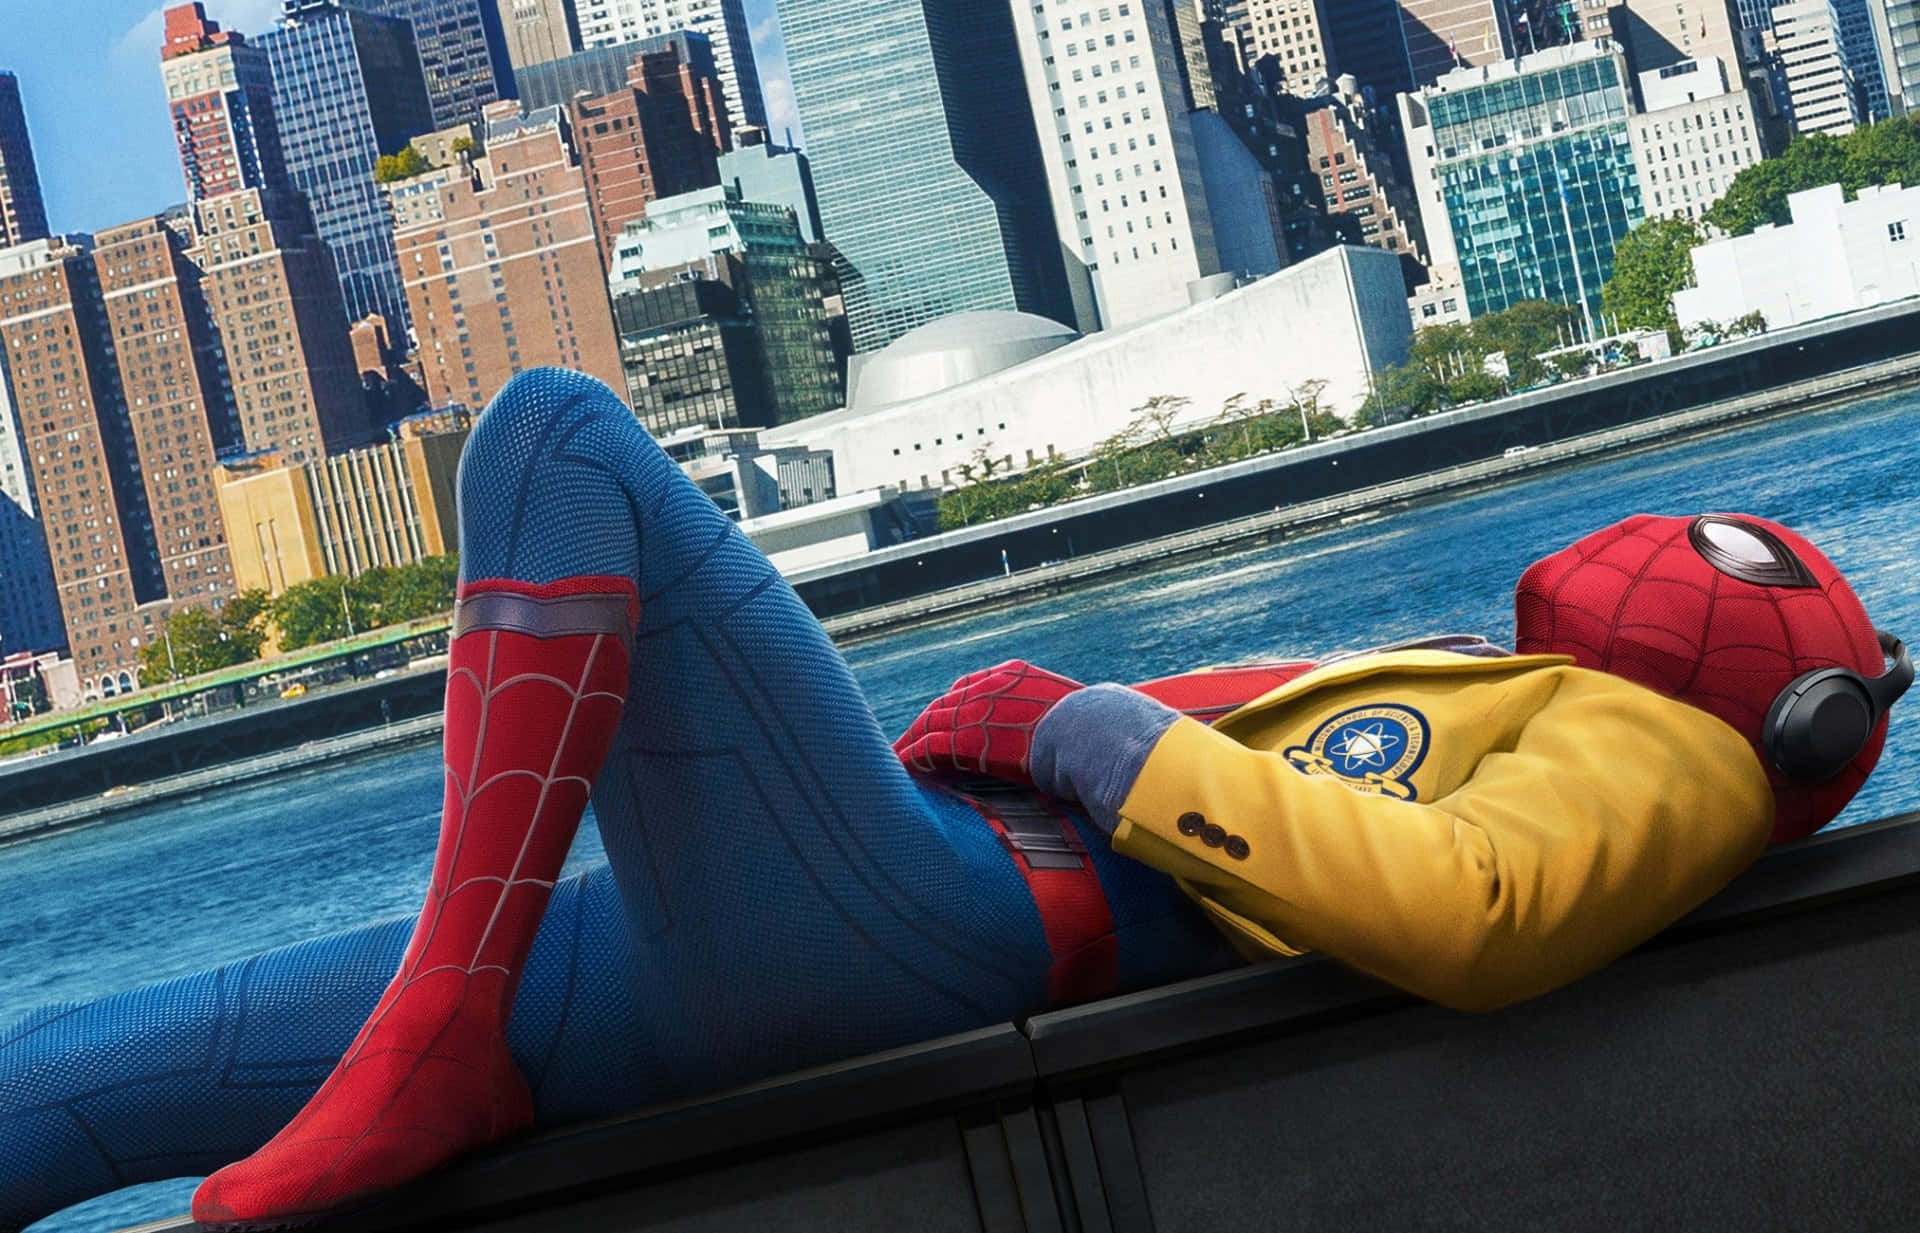 Spider-Man takes off into the depths of the city in Spider-Man Homecoming Wallpaper